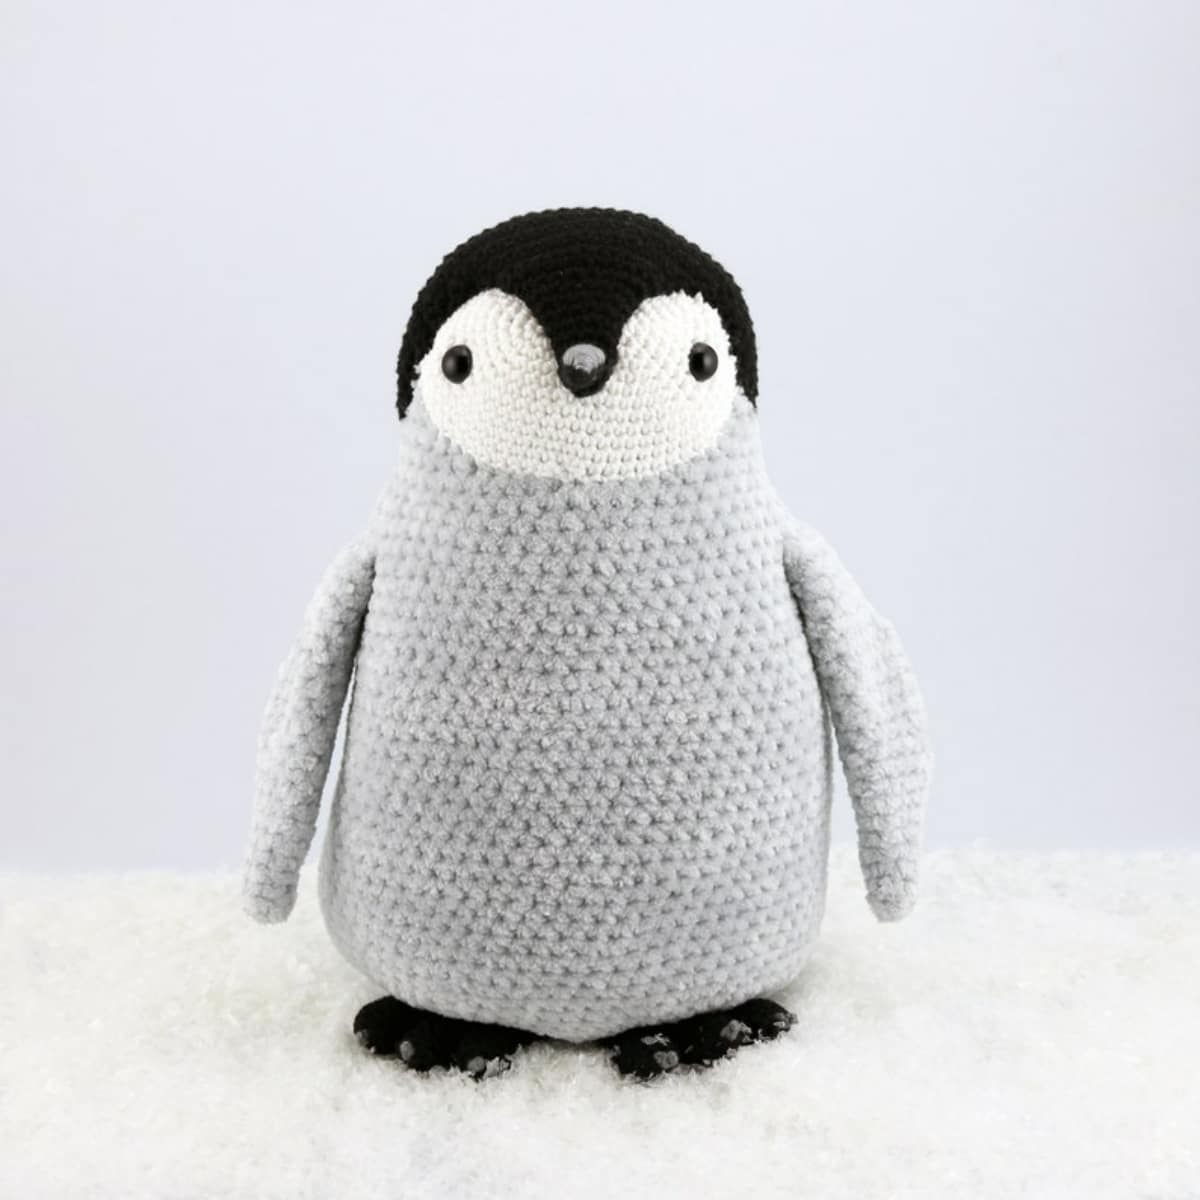 Crochet black and white penguin with a large gray body standing on a fluffy cream blanket.